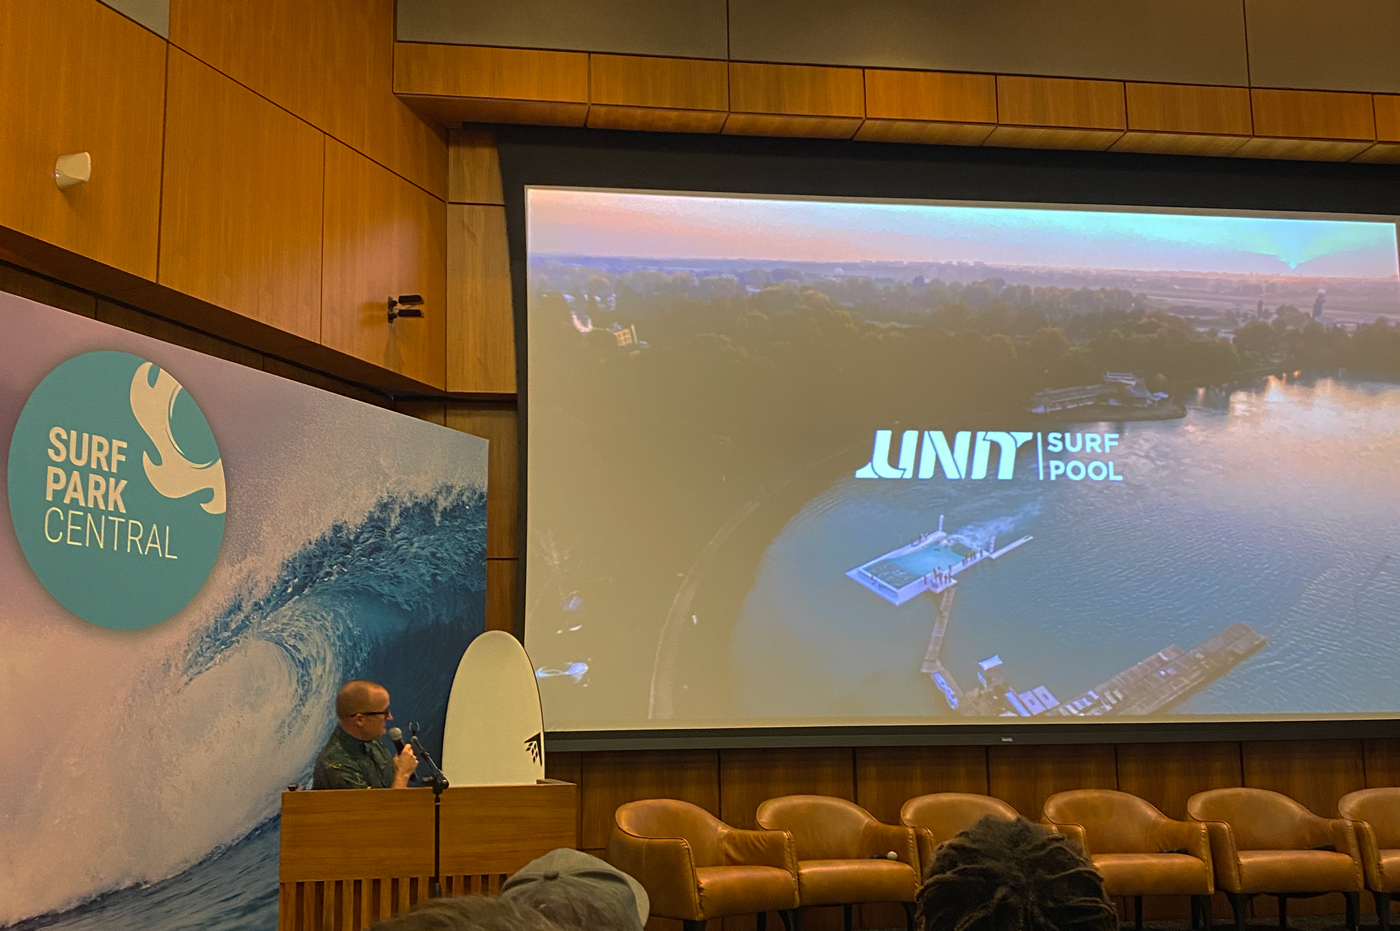 UNIT Surf Pool awarded for Sustainable Impact on Surf Park Summit 2022